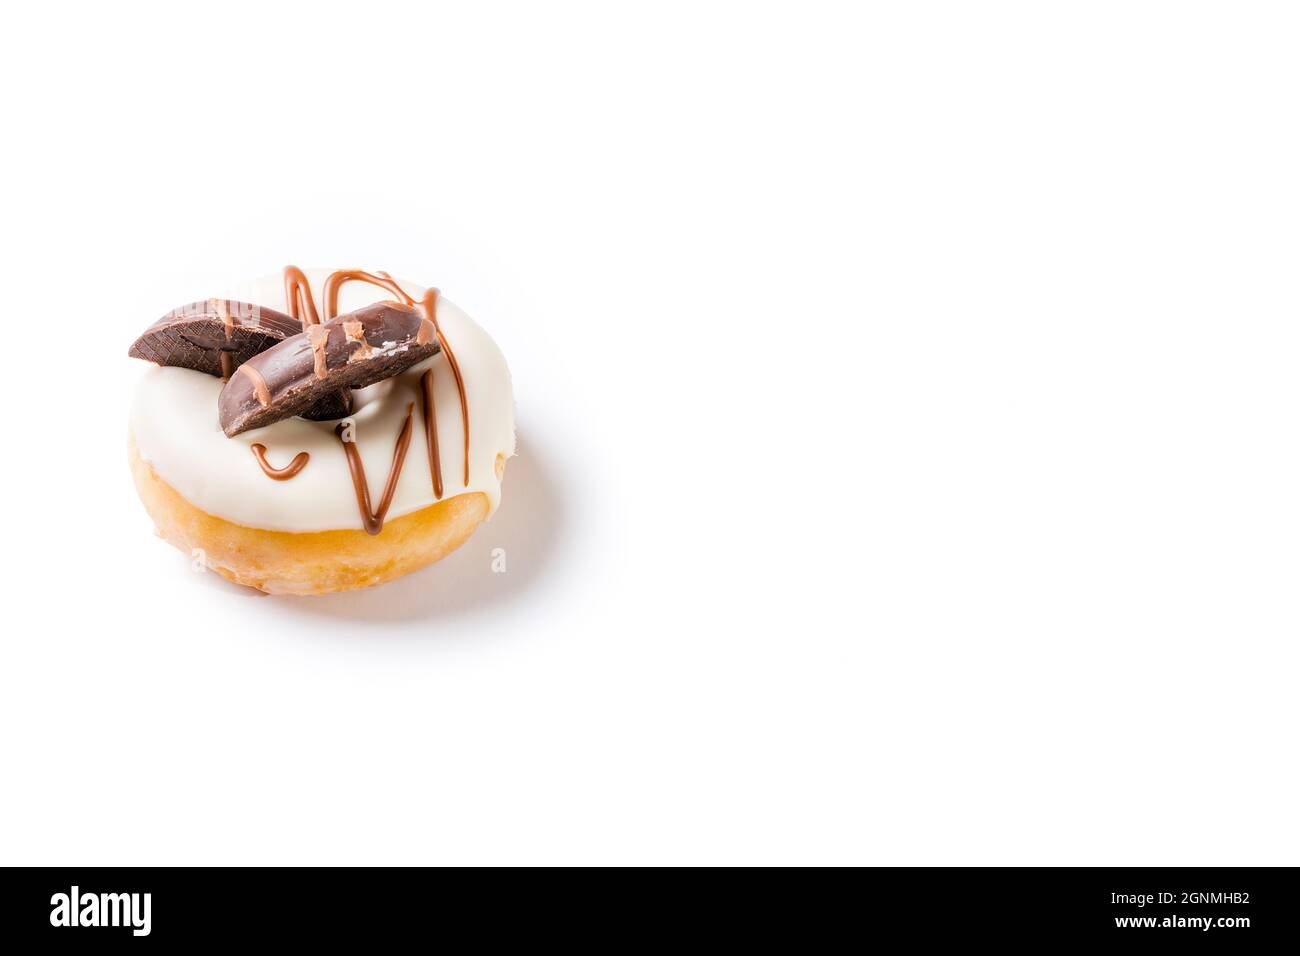 Photograph of a white chocolate donuts with dark chocolate cookies on a white background.The photo is taken in horizontal format and has copy space. Stock Photo